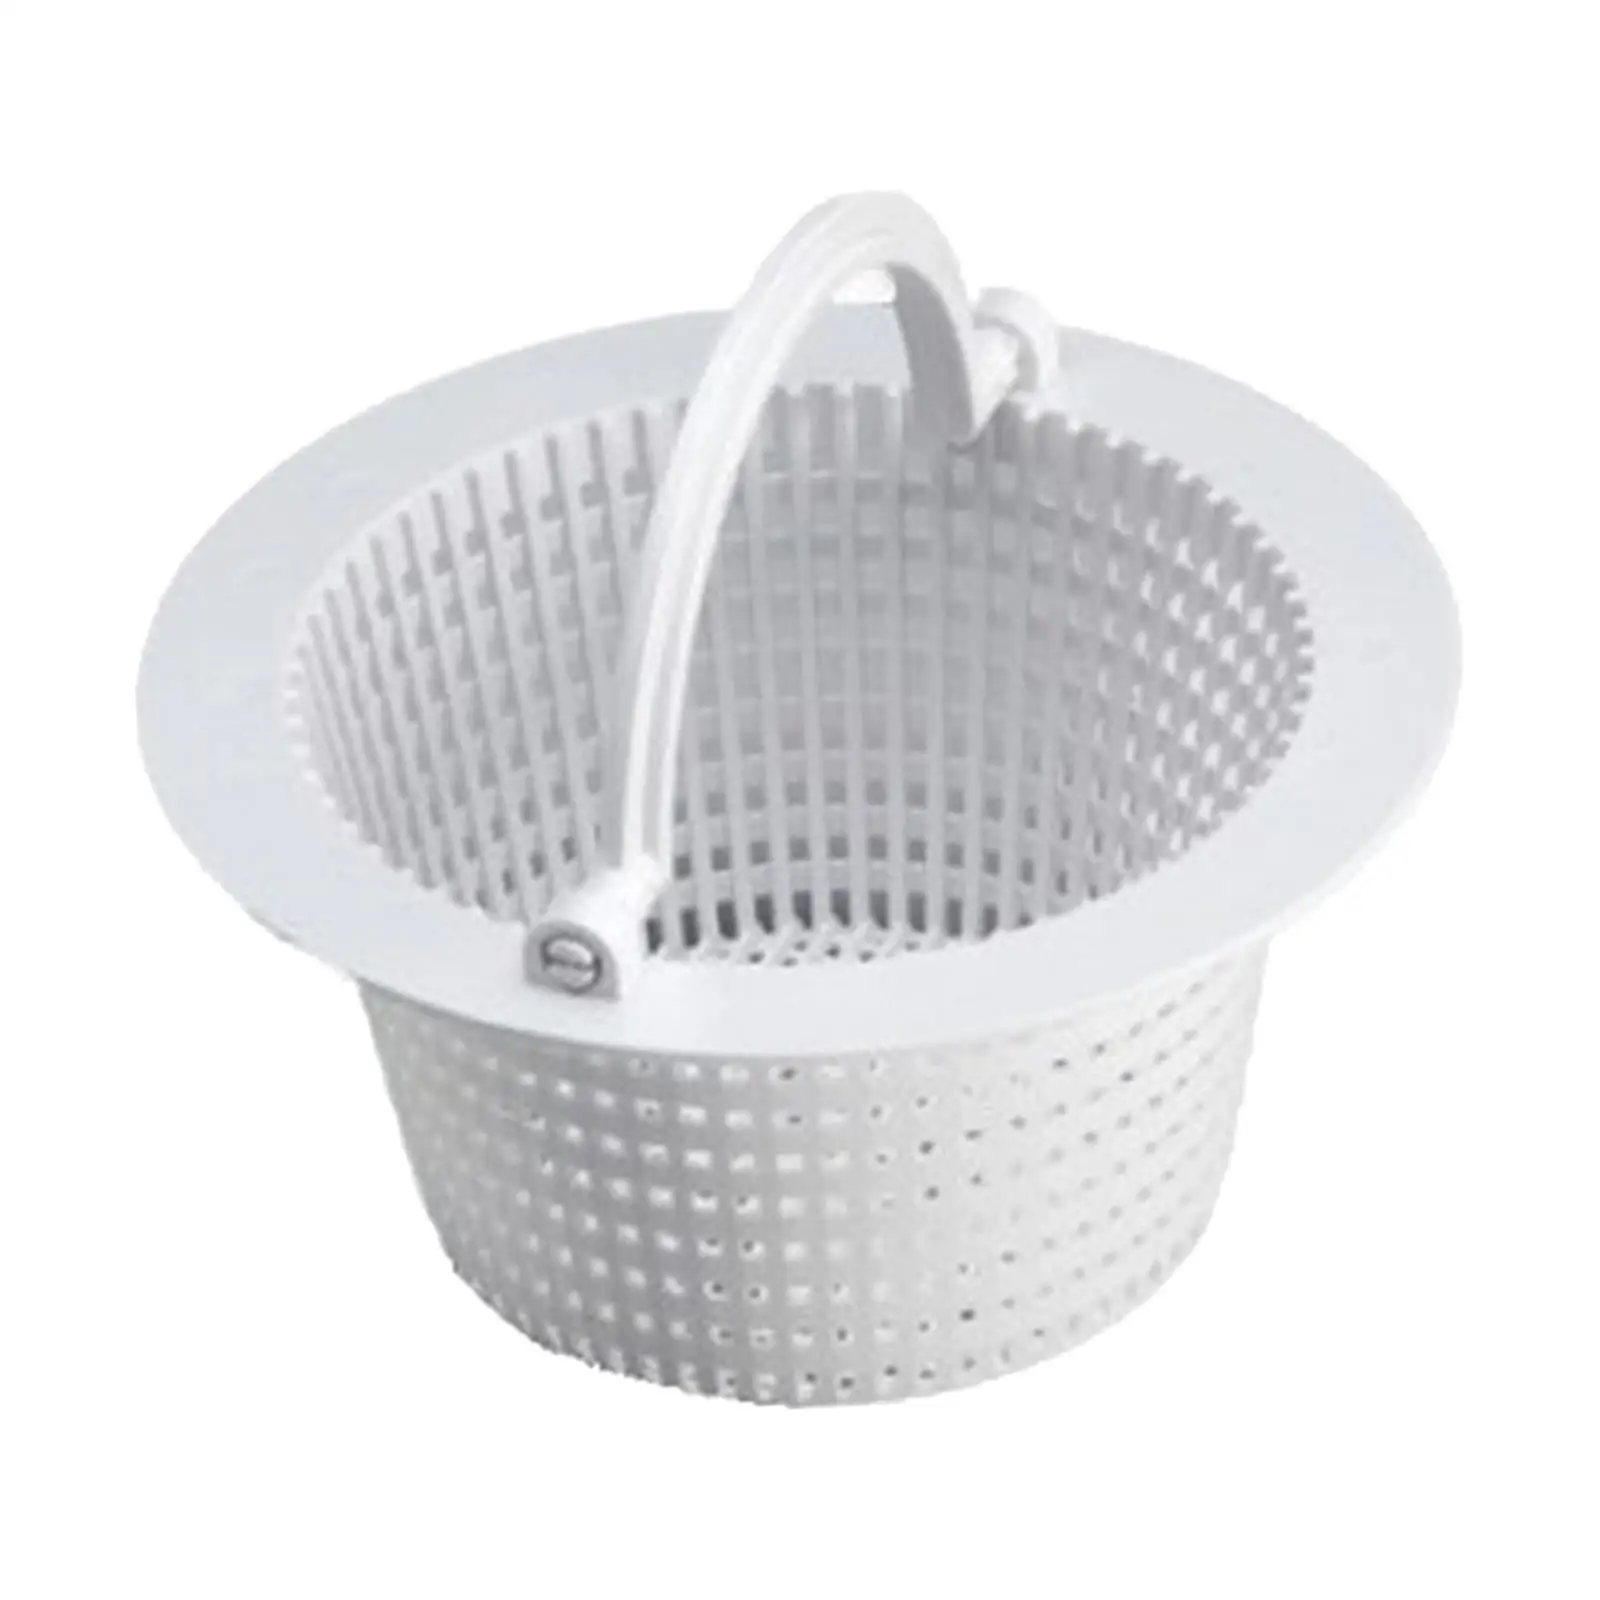 Pool Strainer Basket Accessories Supplies, with Handle Pool Skimmer Basket Pool Filter Basket  Cleaning Leaves in Ground Pool